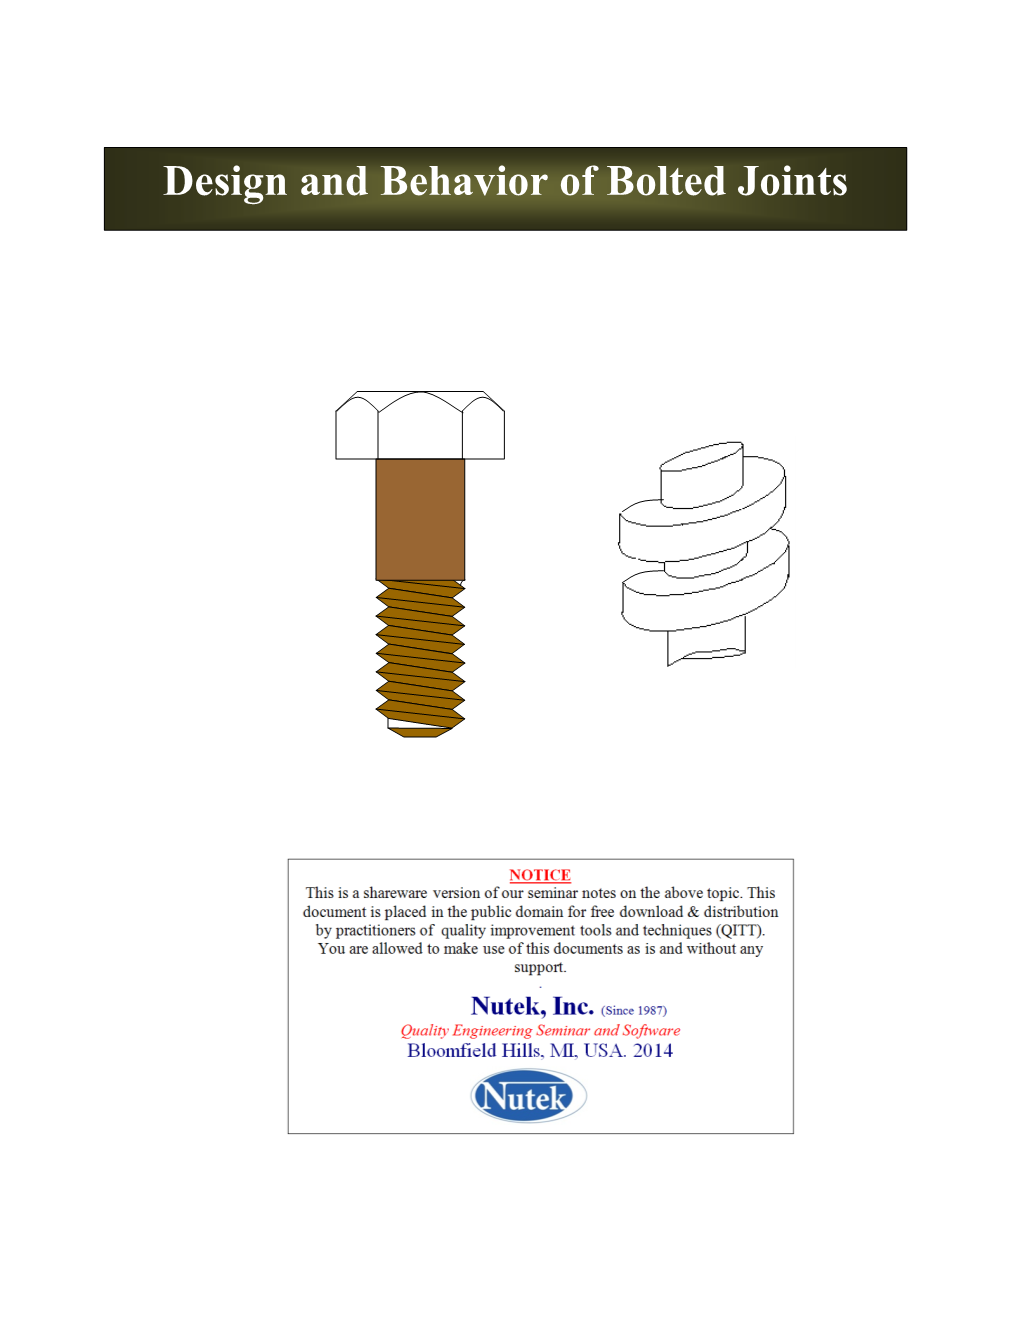 Bolted Joints